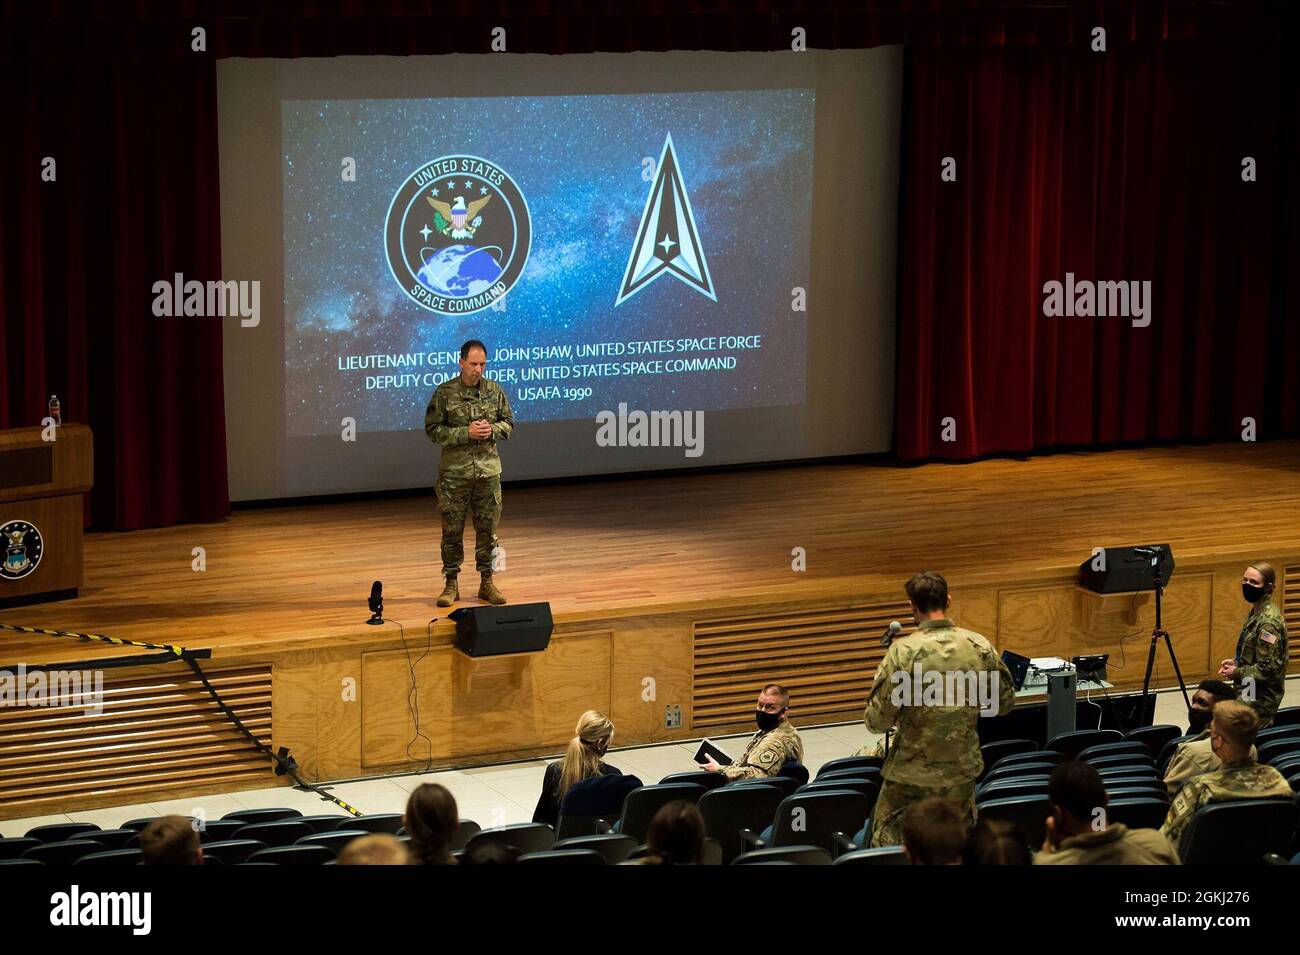 Lieutenant Gen. John Shaw, deputy commander of U.S. Space Command at Peterson Air Force Base, Colorado, speaks to cadets at the U.S. Air Force Academy April 28, 2021. Shaw visited the Academy to discuss the importance of the Academy’s mission of developing leaders of character as it relates to U.S. interests and capabilities in space. The general answered questions from the crowd of 100 cadets who will commission into the Force Next month about becoming the U.S.' newest Guardians. Stock Photo